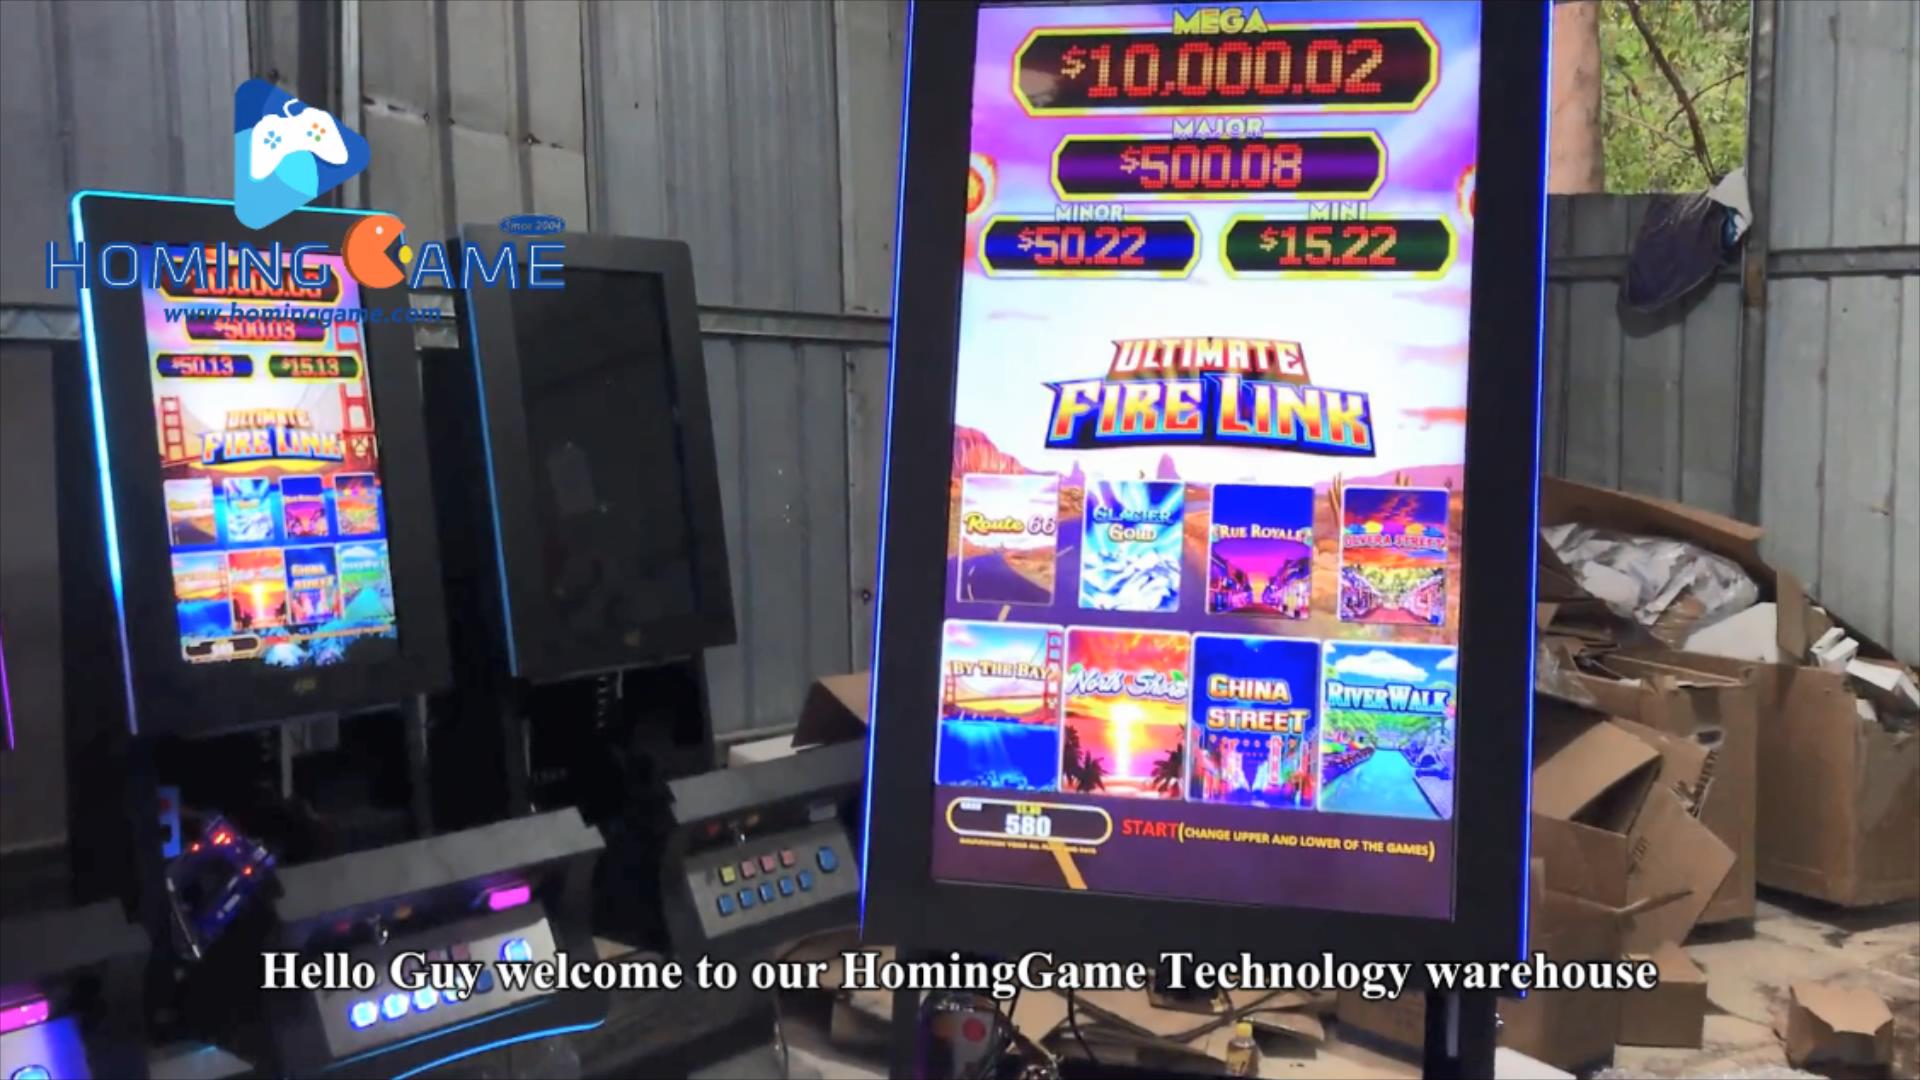 2021 HomingGame Top Sale 32' 43' Touch Monitor 8 in 1 Fire Link Slot Table Game Machine Can Connect the Mutha Goose and Gaggle Ticket System(Order Call Whatsapp:+8618688409495),43' touch monitor 8 in 1 fire link slot table game machine,32' touch monitor 8 in 1 fire link slot table game machine,fire link slot table game,,ultimate fire link,ultimate fire link slot game machine,ultimate fire link slot game,fire link slot game machine,fire link,ultimate fire link slot gaming machine,ultimate fire link slot table gaming machine,slot game,slot table game,slot gaming machine,game machine,arcade game machine,coin operated game machine,arcade game machine for sale,amsuement machine,entertainment game machine,family entertainment game machine,hominggame,www.gametube.hk,indoor game machine,casino,gambling machine,electrical game machine,slot,slot game machine for sale,slot table for sale,simulator game machine,video game machine,video game,video game machine for sale,hominggame fire link slot game,slot gaming